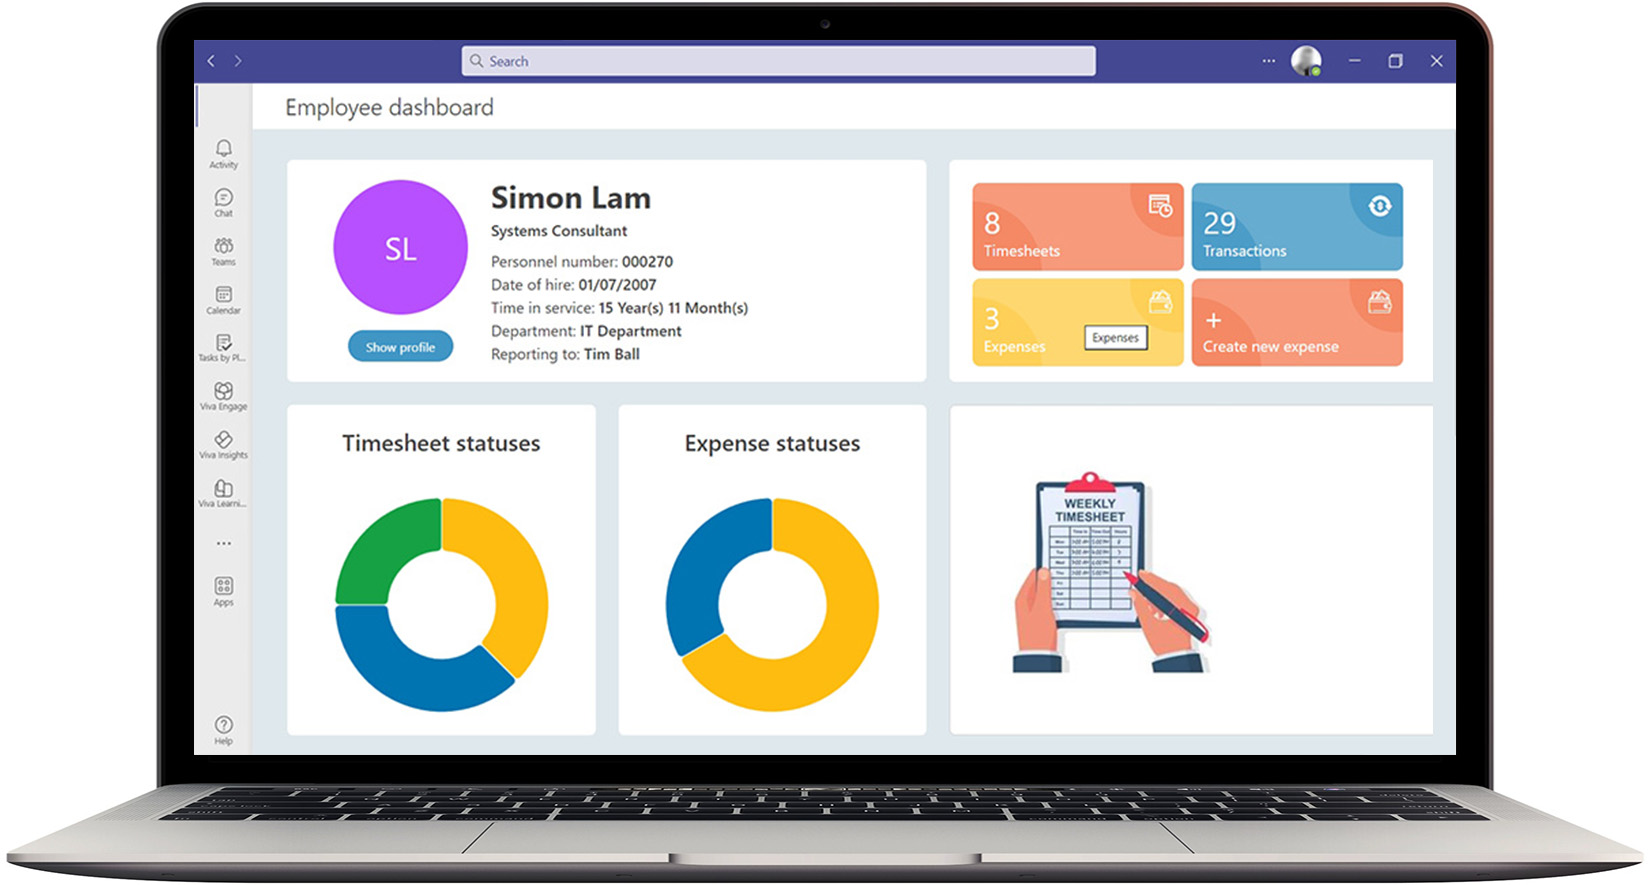 FourVision-HR-Suite-Dashboards-in-Microsoft-Teams